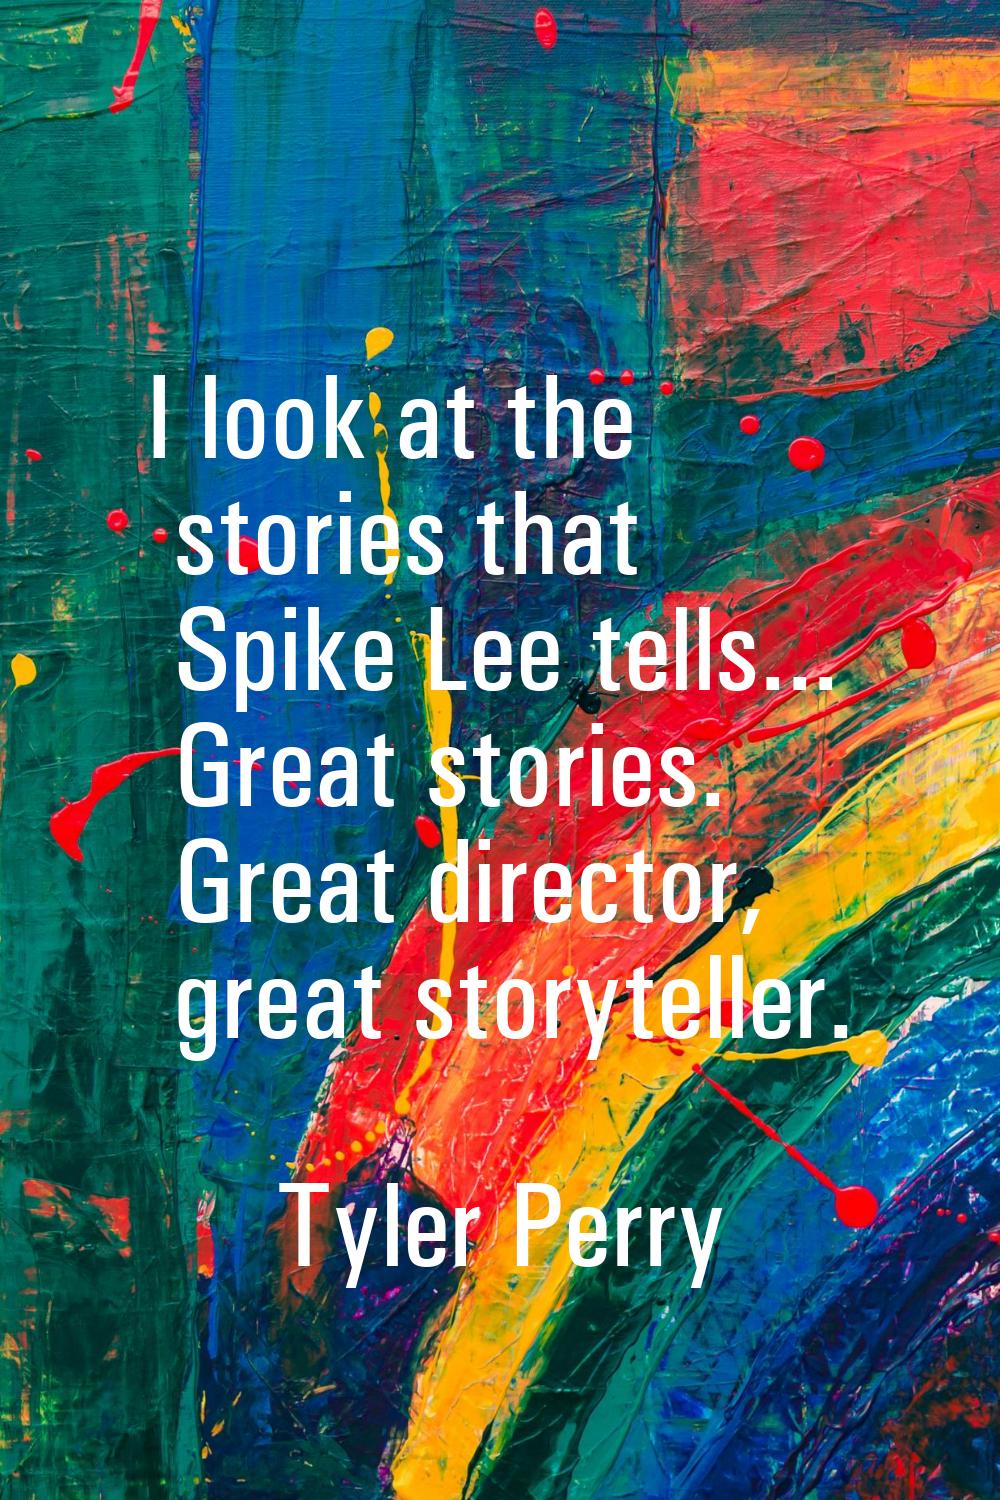 I look at the stories that Spike Lee tells... Great stories. Great director, great storyteller.